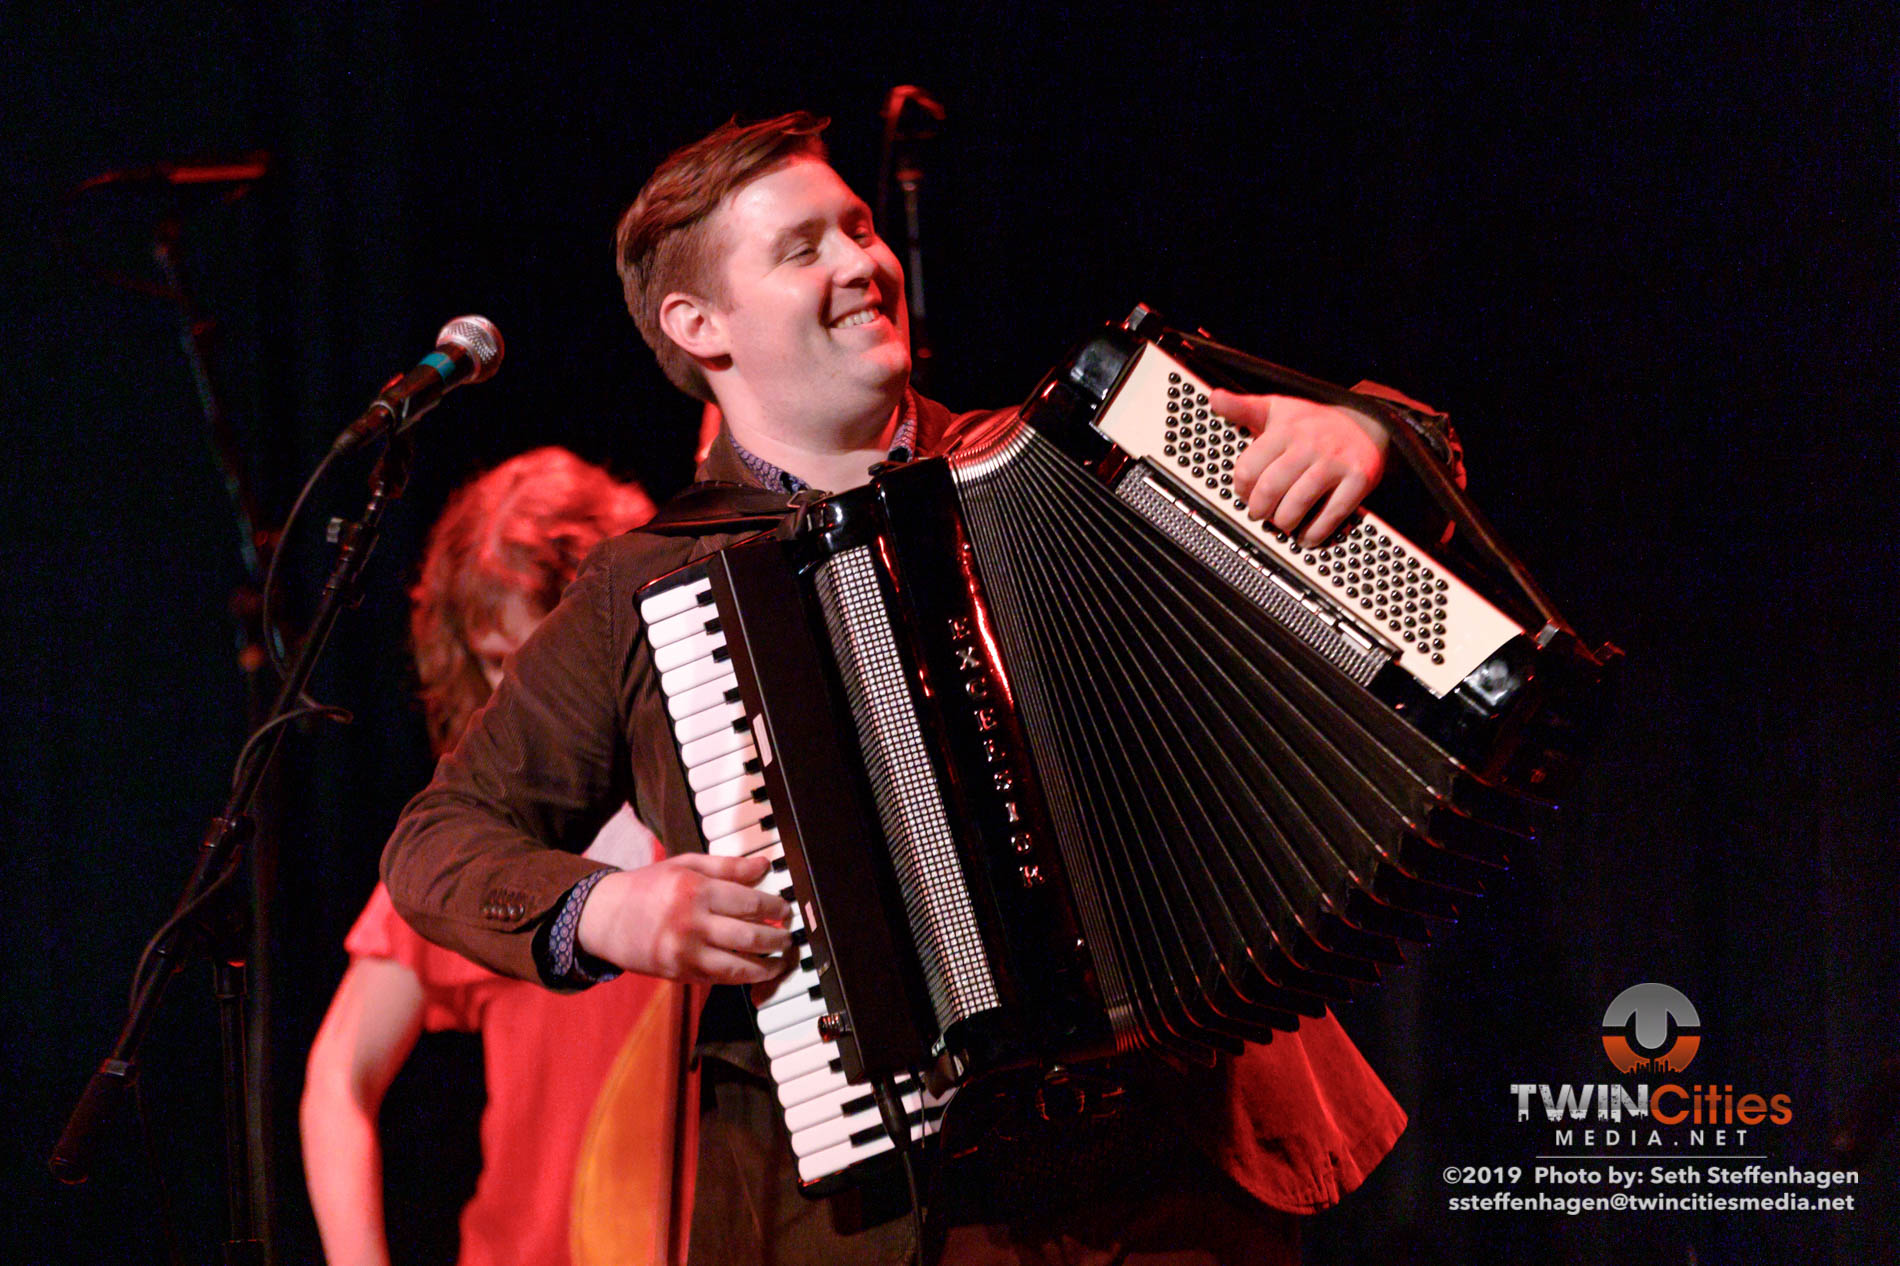 March 15, 2019 - Minneapolis, Minnesota, United States -  Orkestar Bez Ime live in concert at the Cedar Cultural Center opening for MarchFourth.

(Photo by Seth Steffenhagen/Steffenhagen Photography)